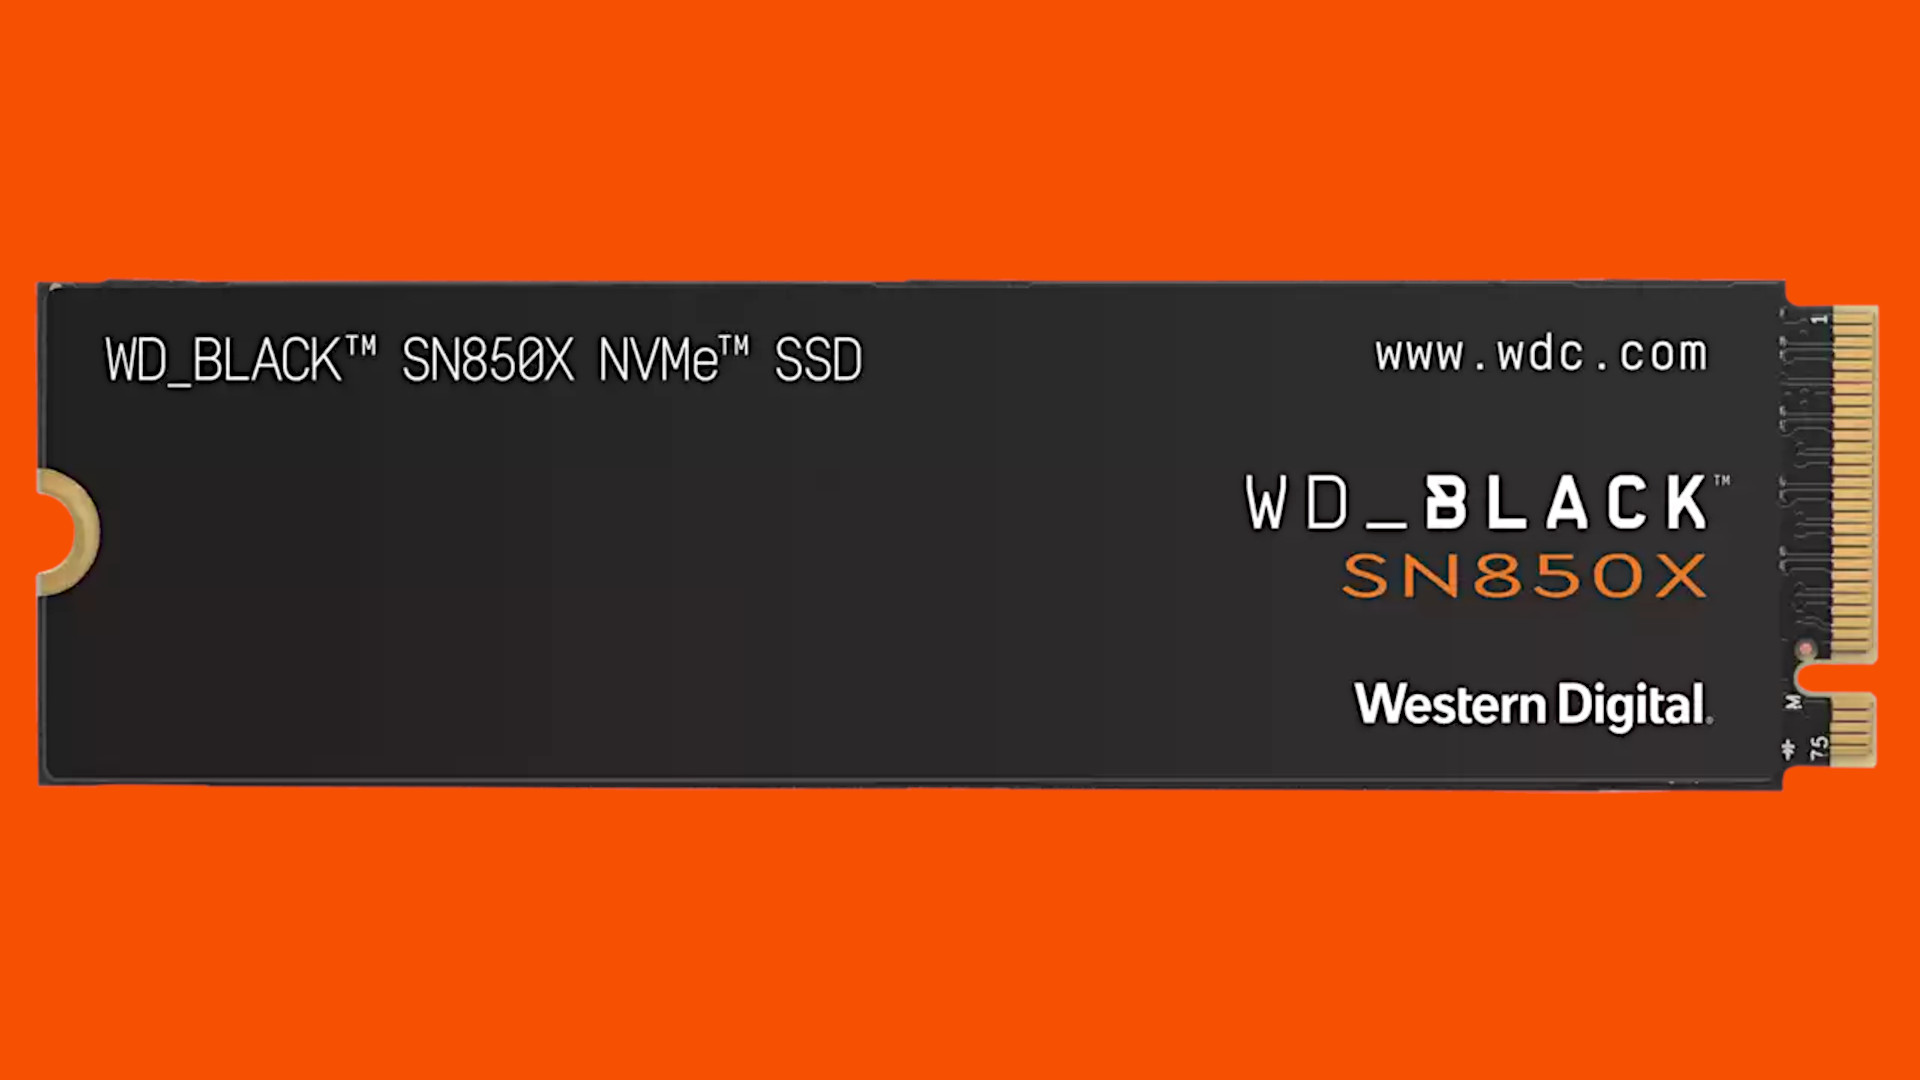 Get your hands on a WD Black SN850X SSD for the cheapest price ever.